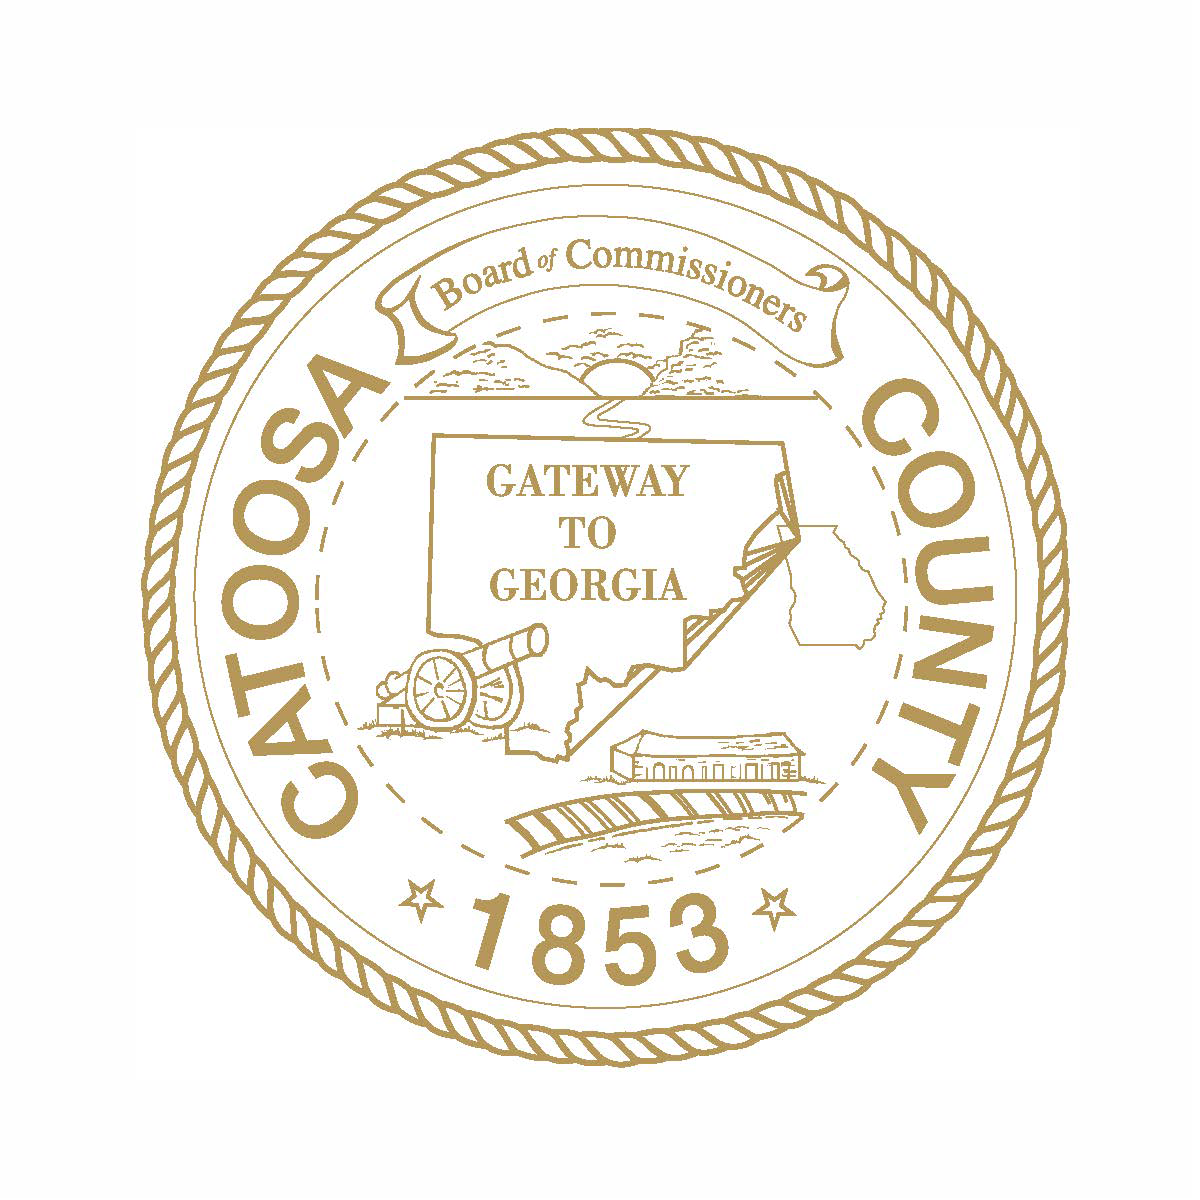 Catoosa Co logo PNG (3).png